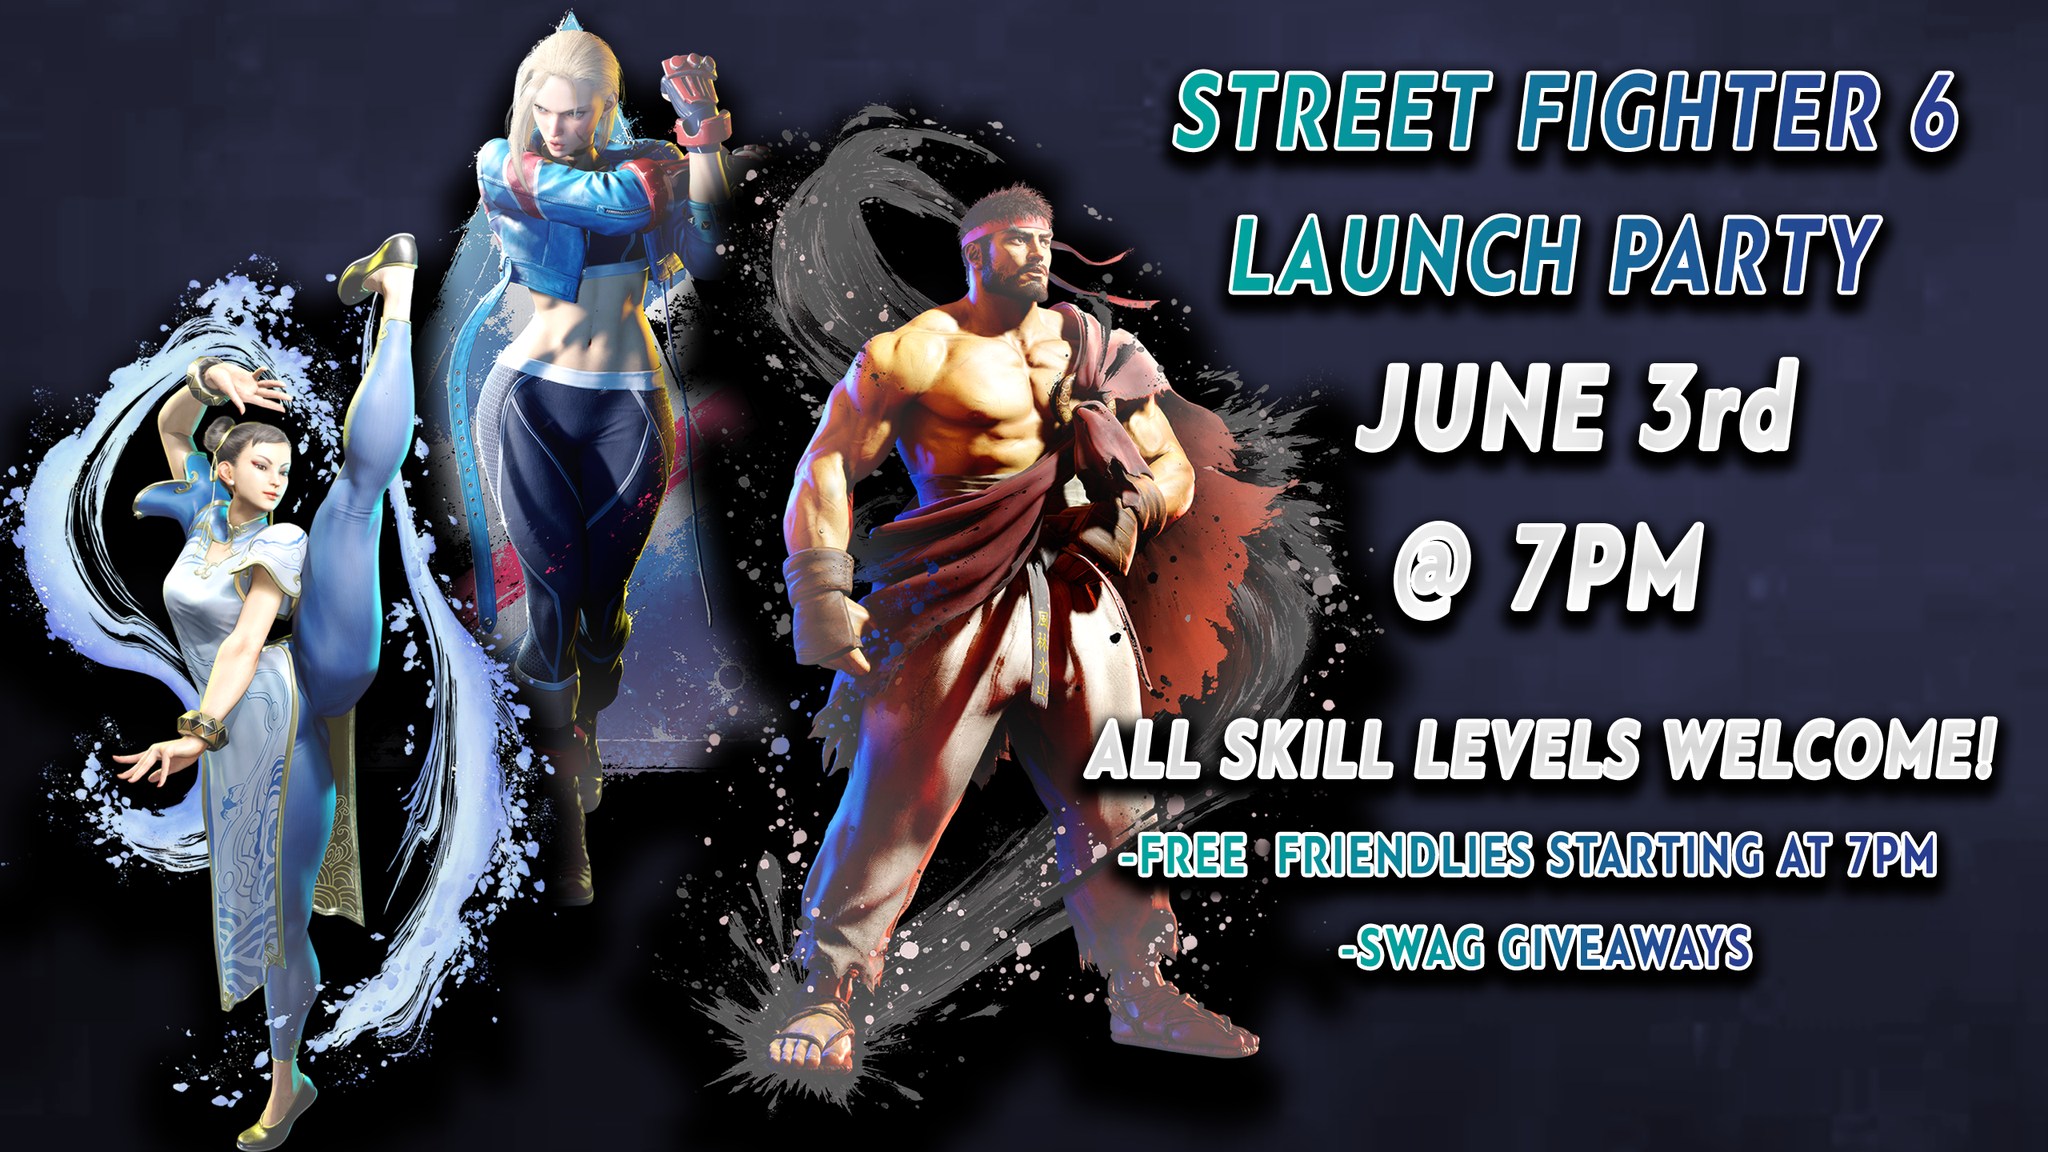 a poster for the street fighter 6 launch party.